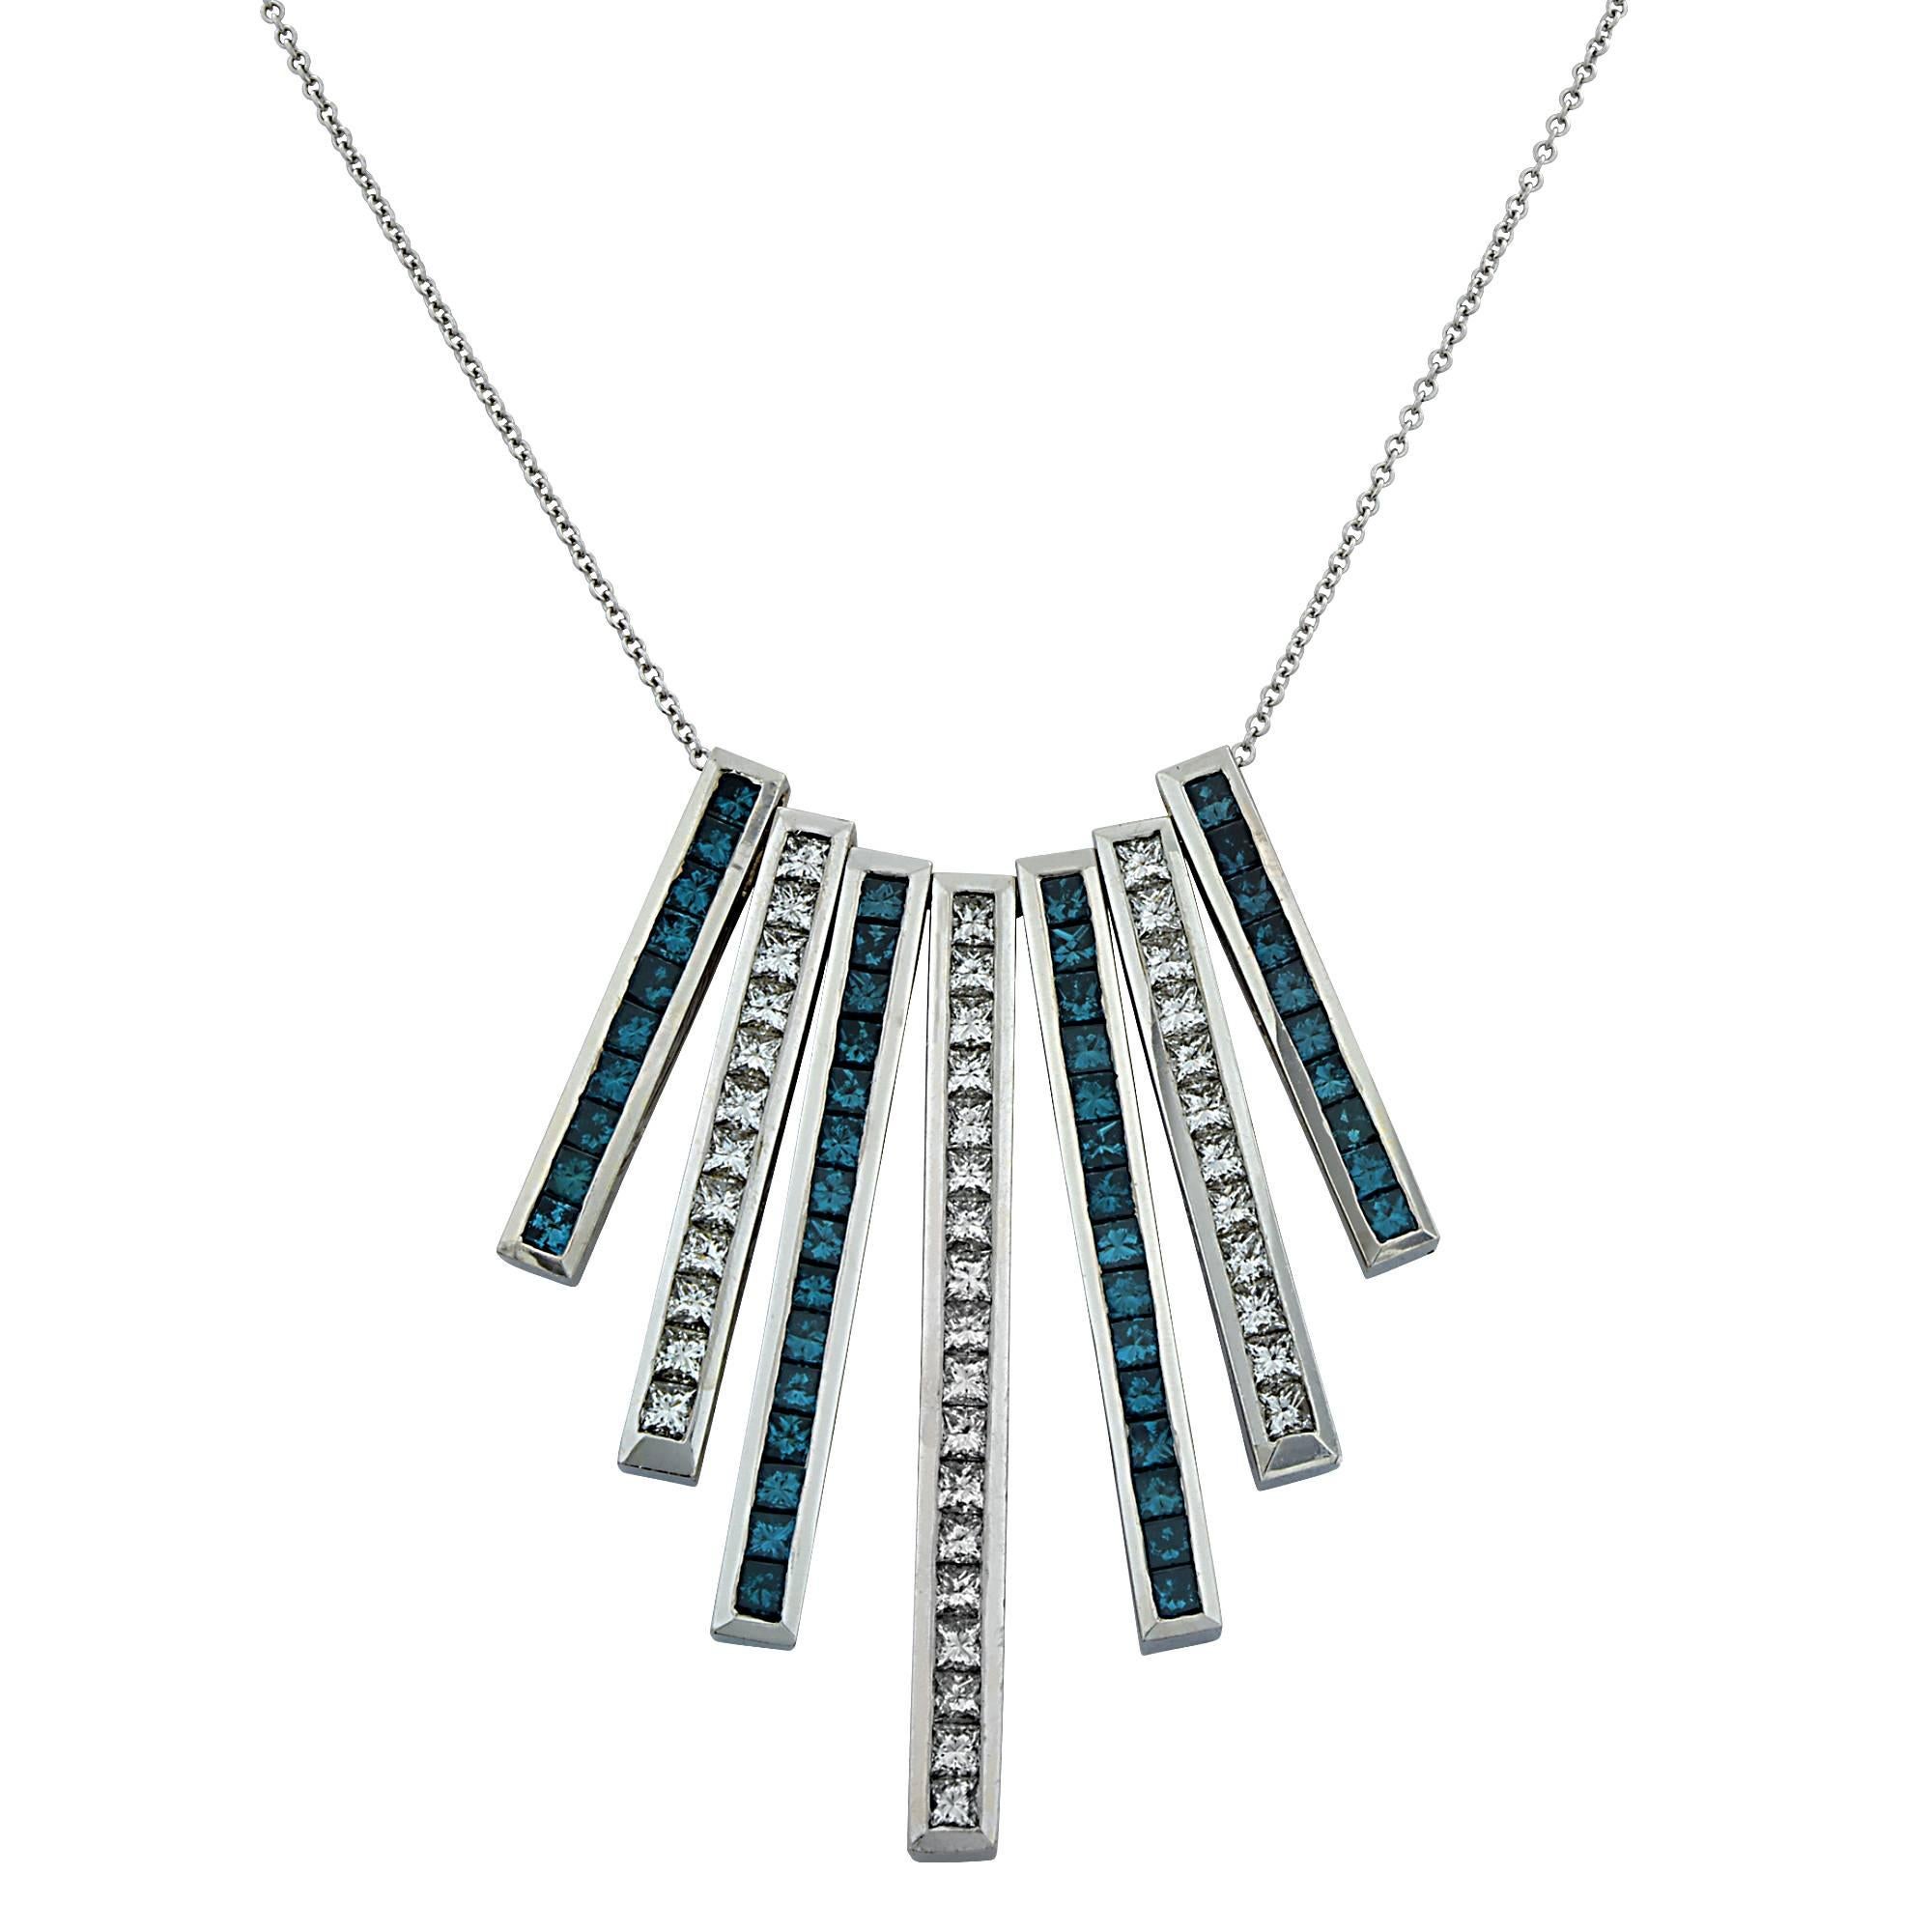 18k white gold necklace containing 42 princess cut diamonds weighing approximately 4.20cts G-H color and VS clarity as well as 50 color enhanced blue princess cut diamonds weighing approximately 3.50cts VS-SI clarity.

The necklace measures 16